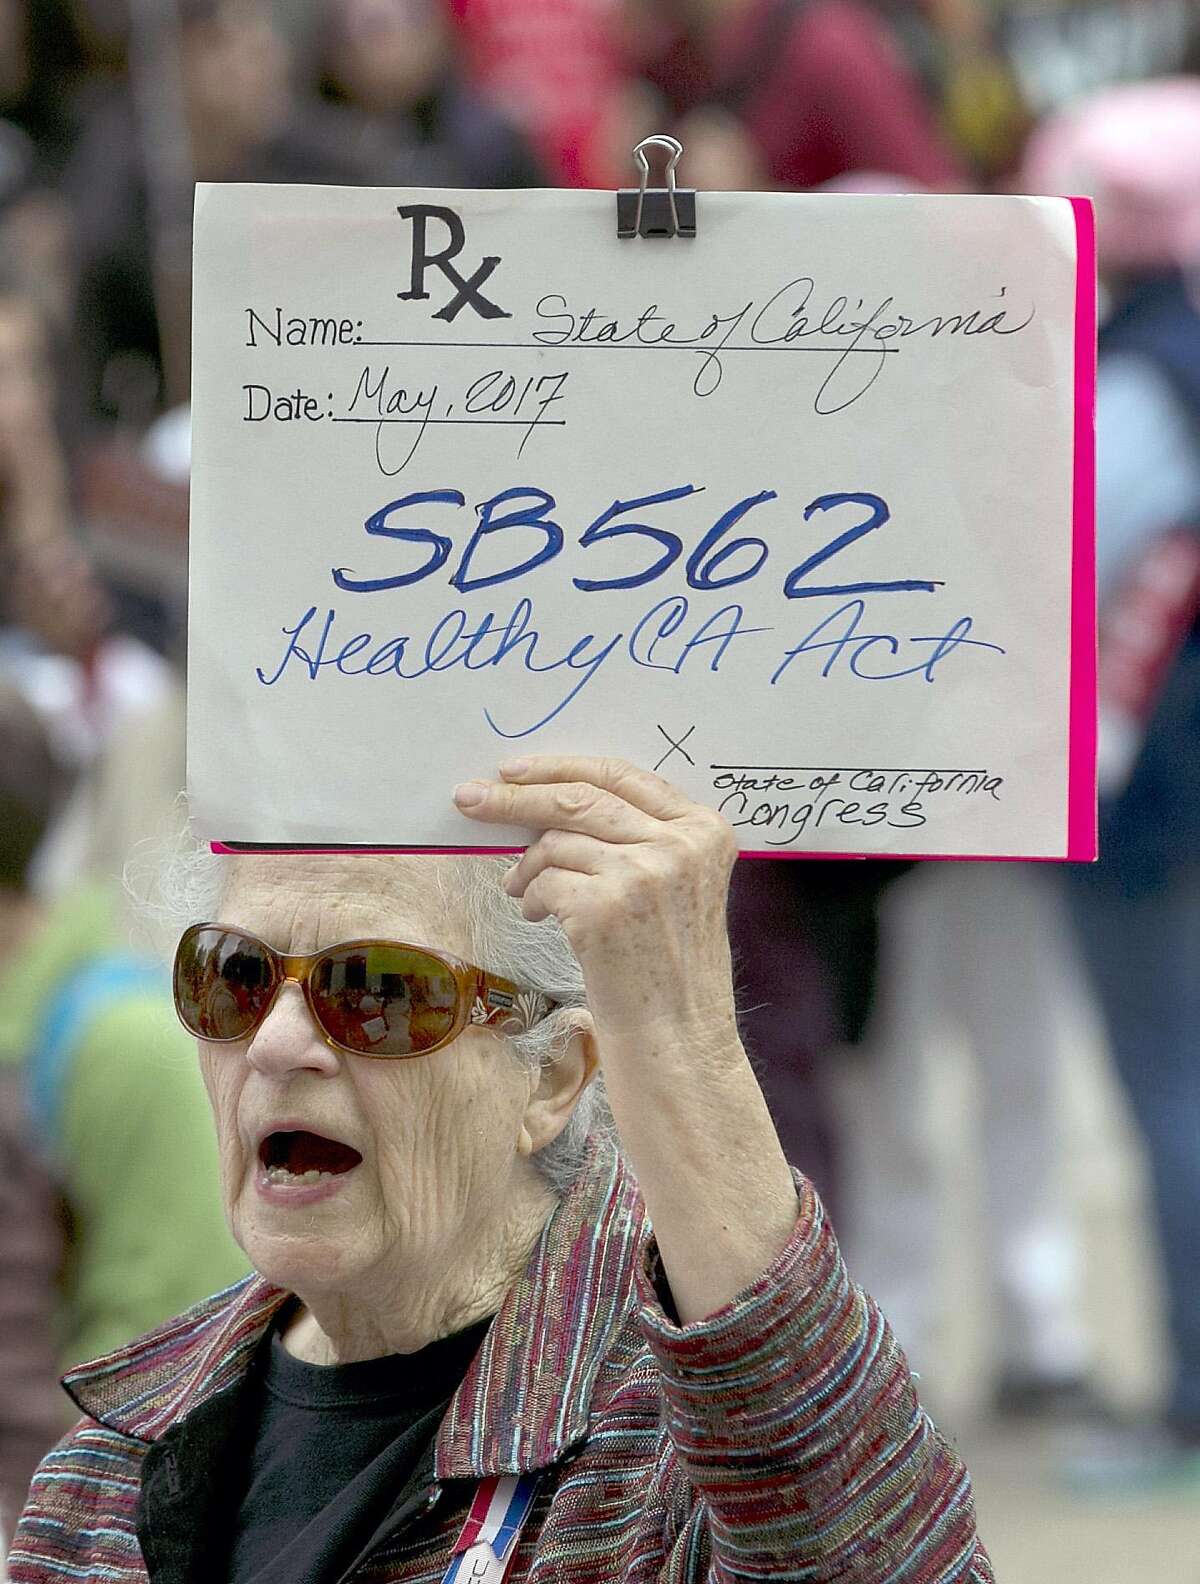 Caroline Elam holds up a mock prescription order calling for passage of SB562, a single-payer health care bill, during a march to the Capitol, Wednesday, April 26, 2017, in Sacramento, Calif. The bill, by Democratic state Sens. Ricardo Lara, of Bell Gardens, and Toni Atkins, of San Diego, would guarantee health coverage with no out-of-pocket cost for all California residents, including people living in the country illegally is to be heard in the Senate Health Committee on Wednesday. (AP Photo/Rich Pedroncelli)